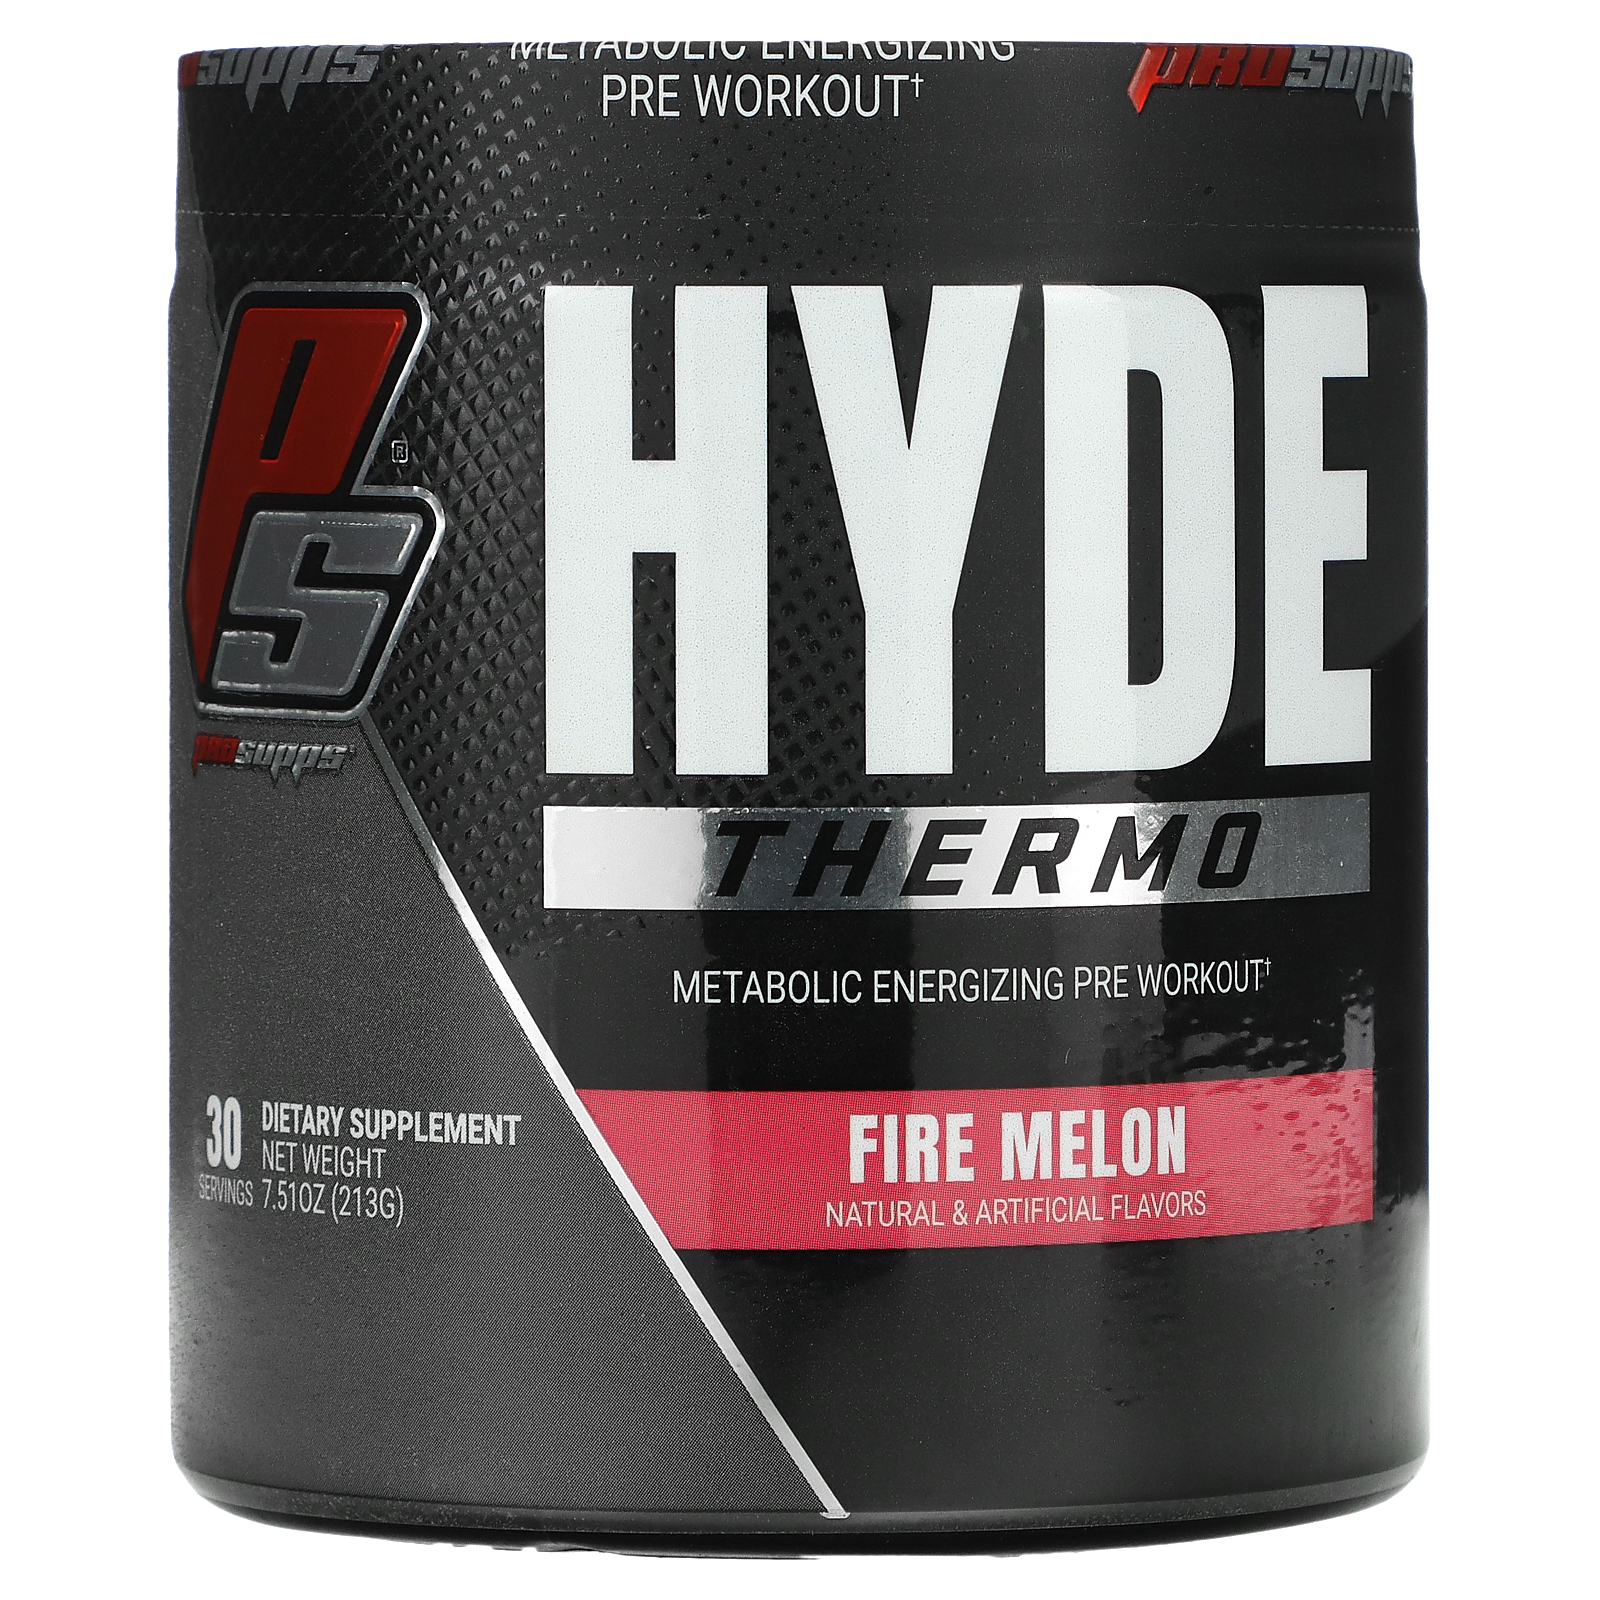 ProSupps, Hyde Thermo, Metabolic Energizing Pre Workout, Fire Melon, 7.